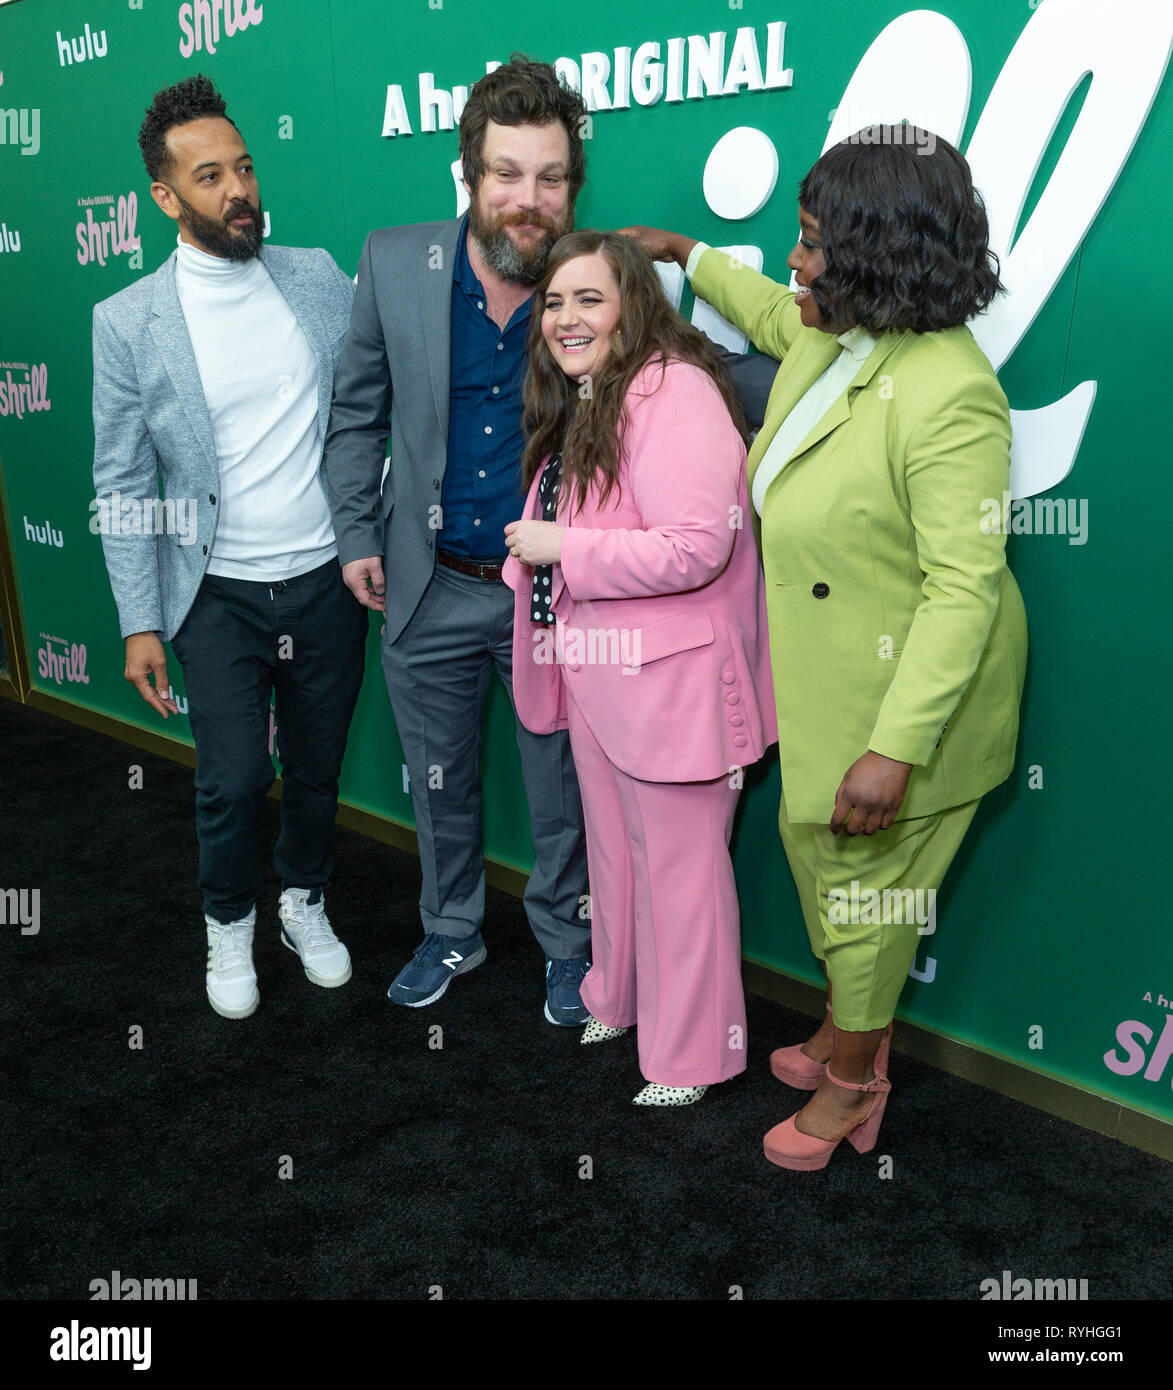 New York, United States. 13th Mar, 2019. New York, NY - March 13, 2019: Ian Owens, Luka Jones, Aidy Bryant, Lolly Adefope attends New York Hulu Shrill premiere screening at Walter Reade Theater of Lincoln Center Credit: lev radin/Alamy Live News Stock Photo